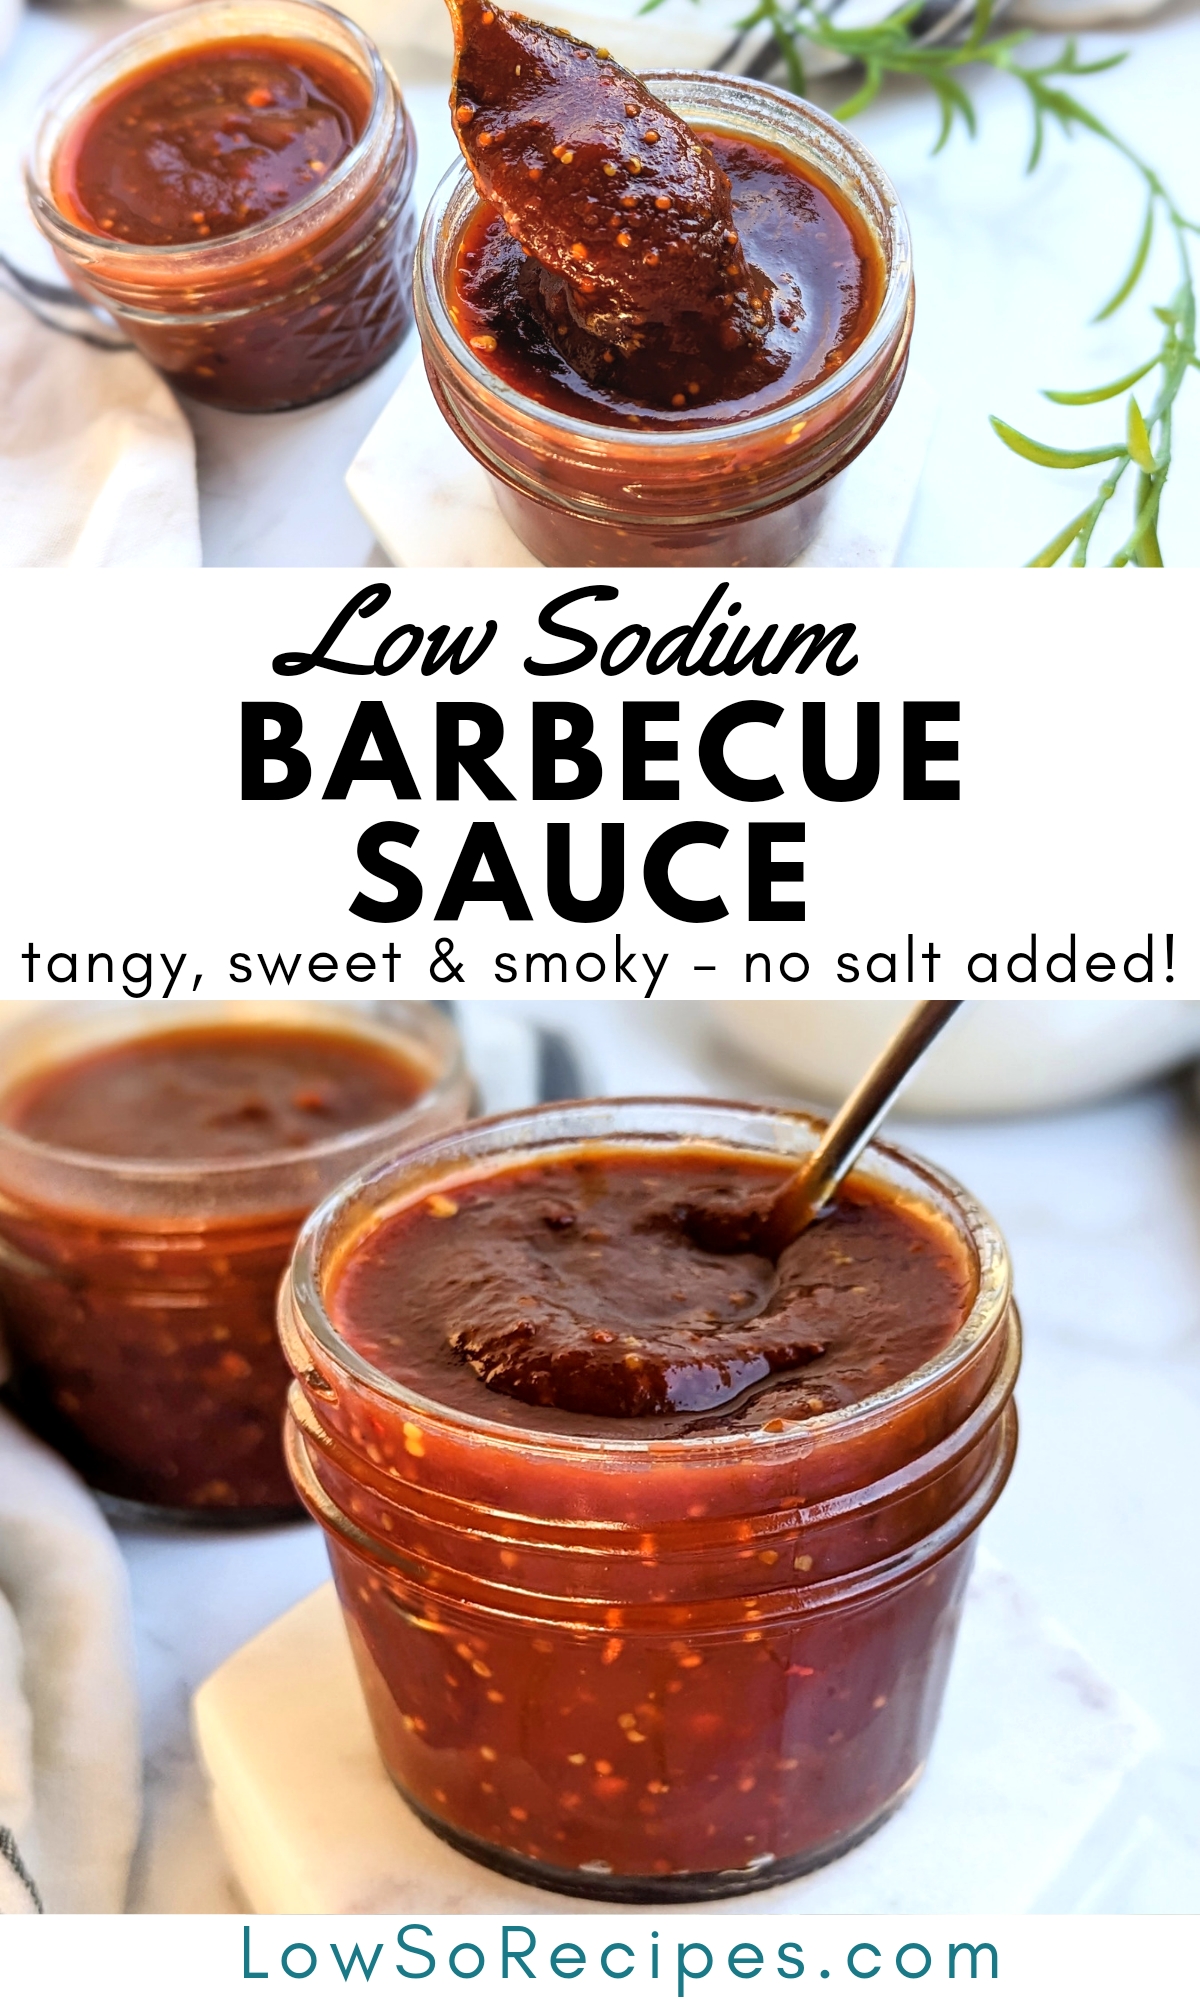 low sodium barbecue sauce recipe no salt added heart healthy sauces without salt or preservatives low salt sauces